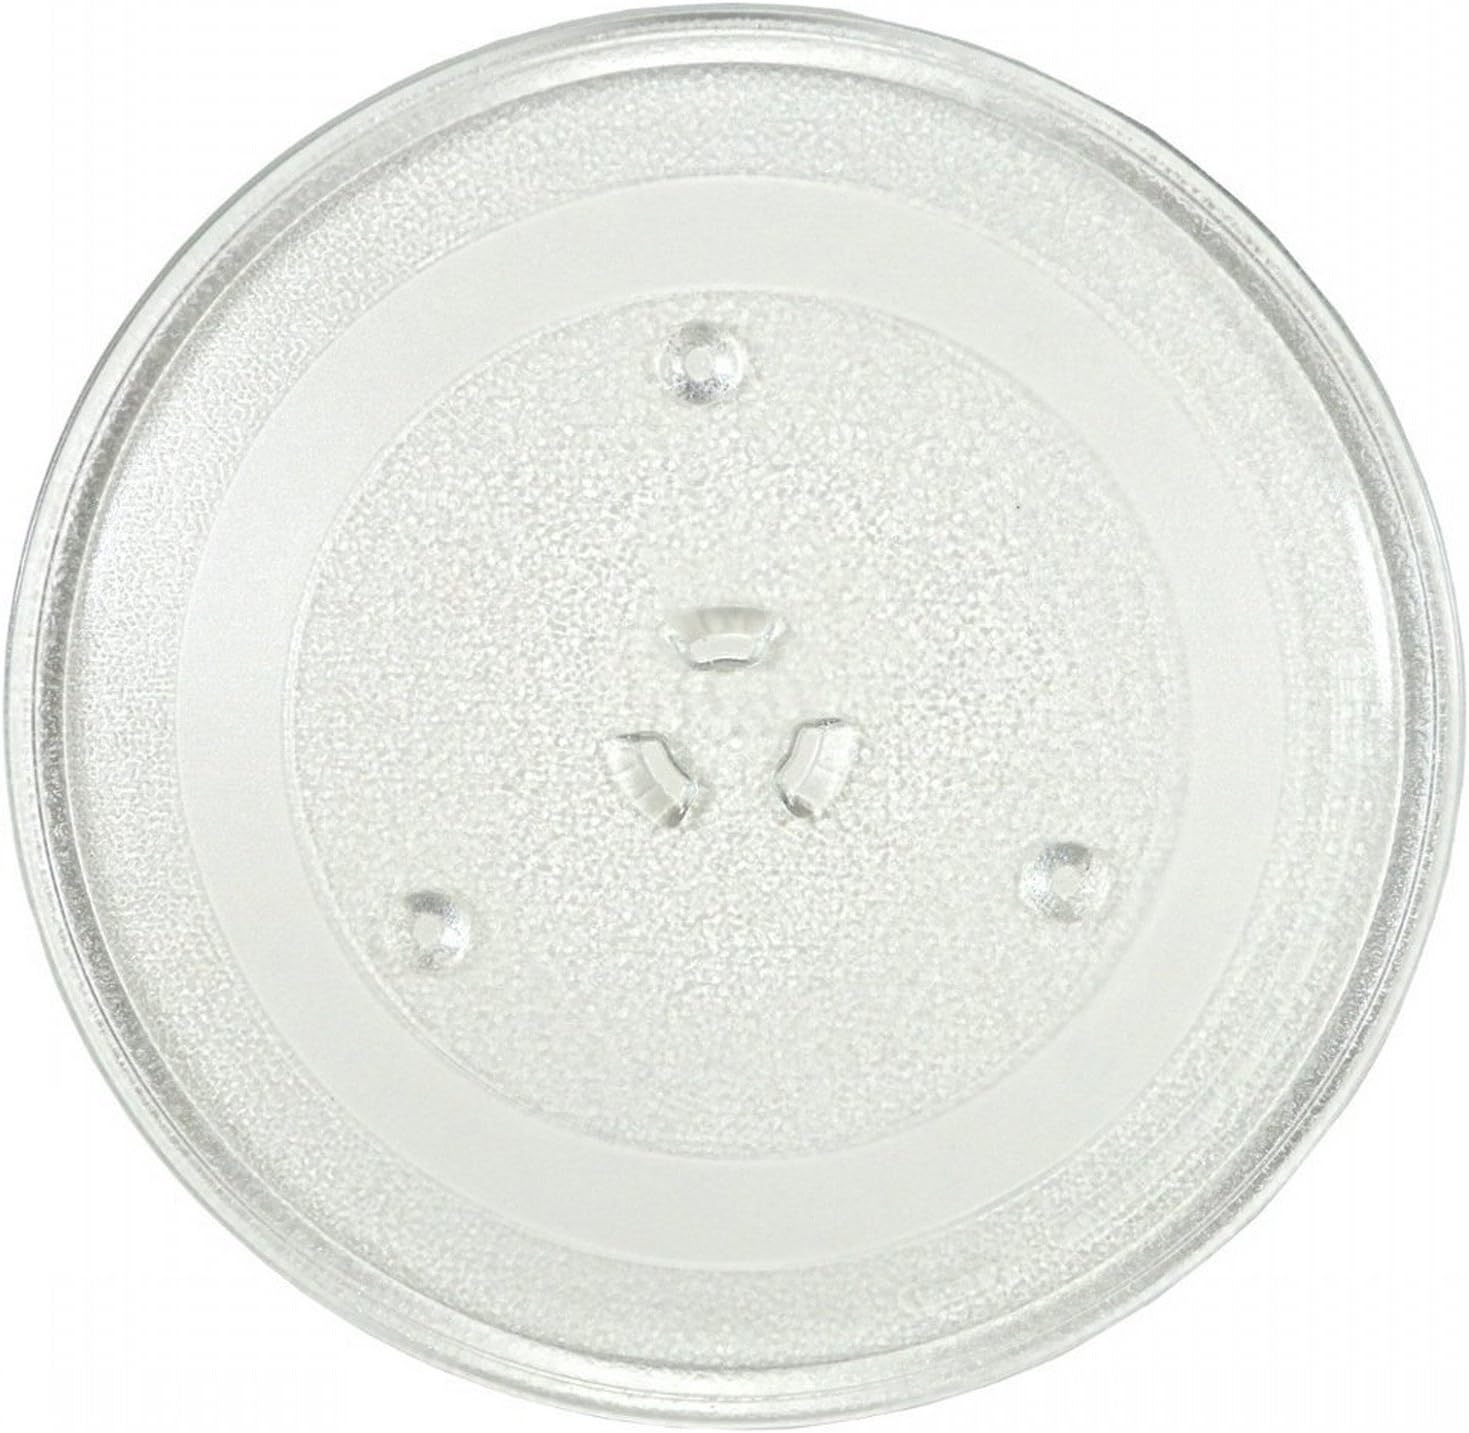 Impresa Products 11.25" GE and Samsung -Compatible Microwave Glass Plate / Microwave Glass Turntable Plate Replacement - 11 1/4" Plate